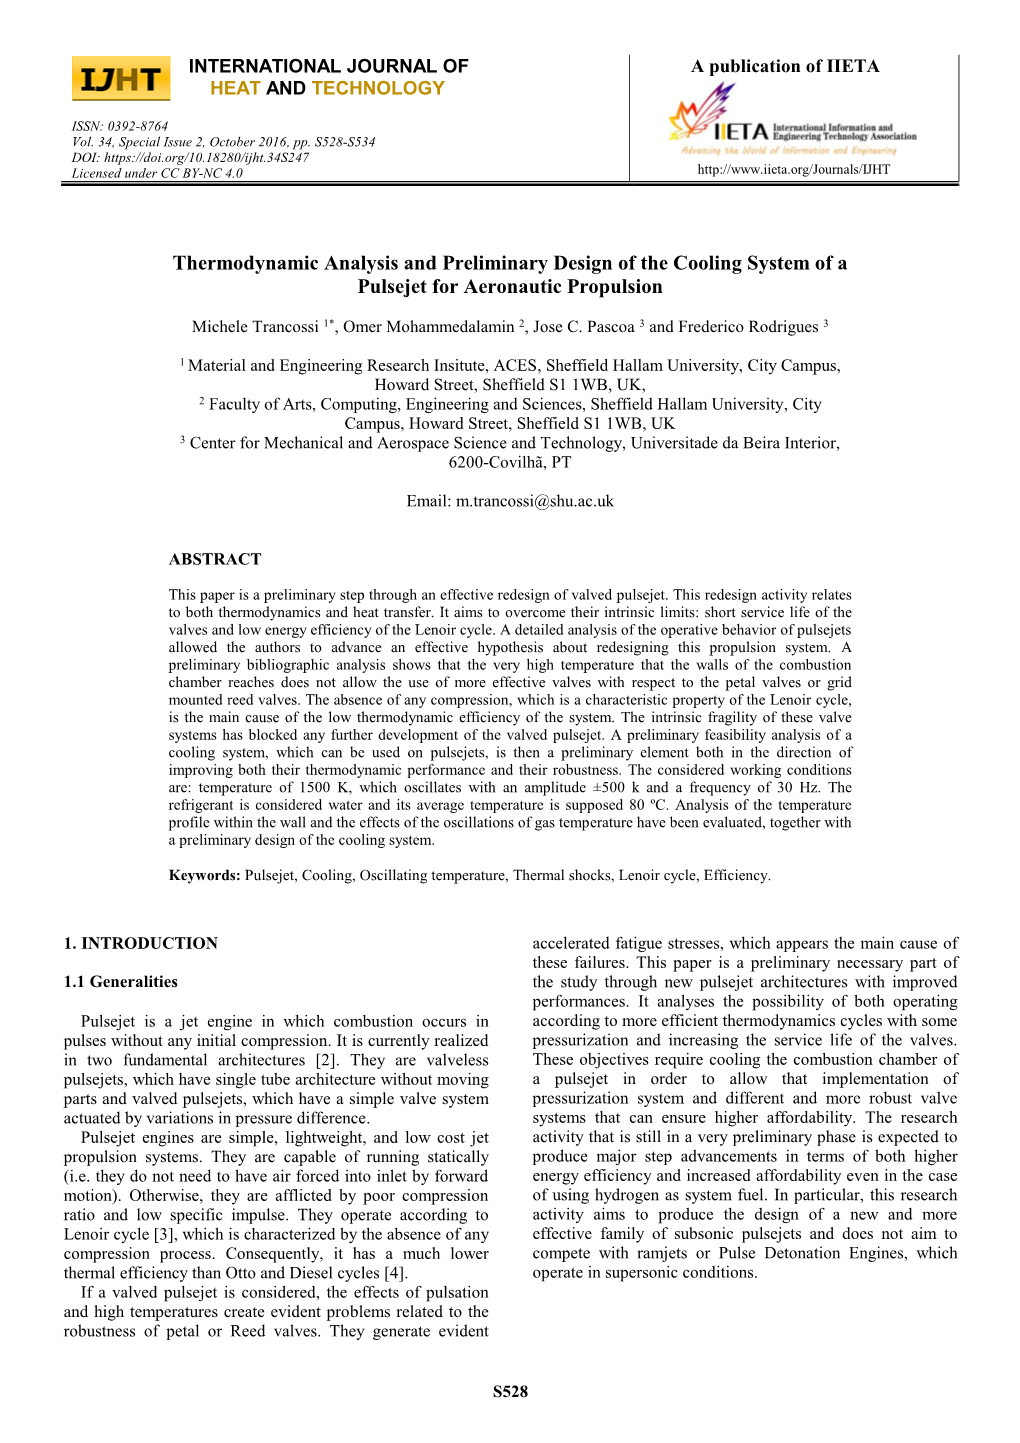 Thermodynamic Analysis and Preliminary Design of the Cooling System of a Pulsejet for Aeronautic Propulsion